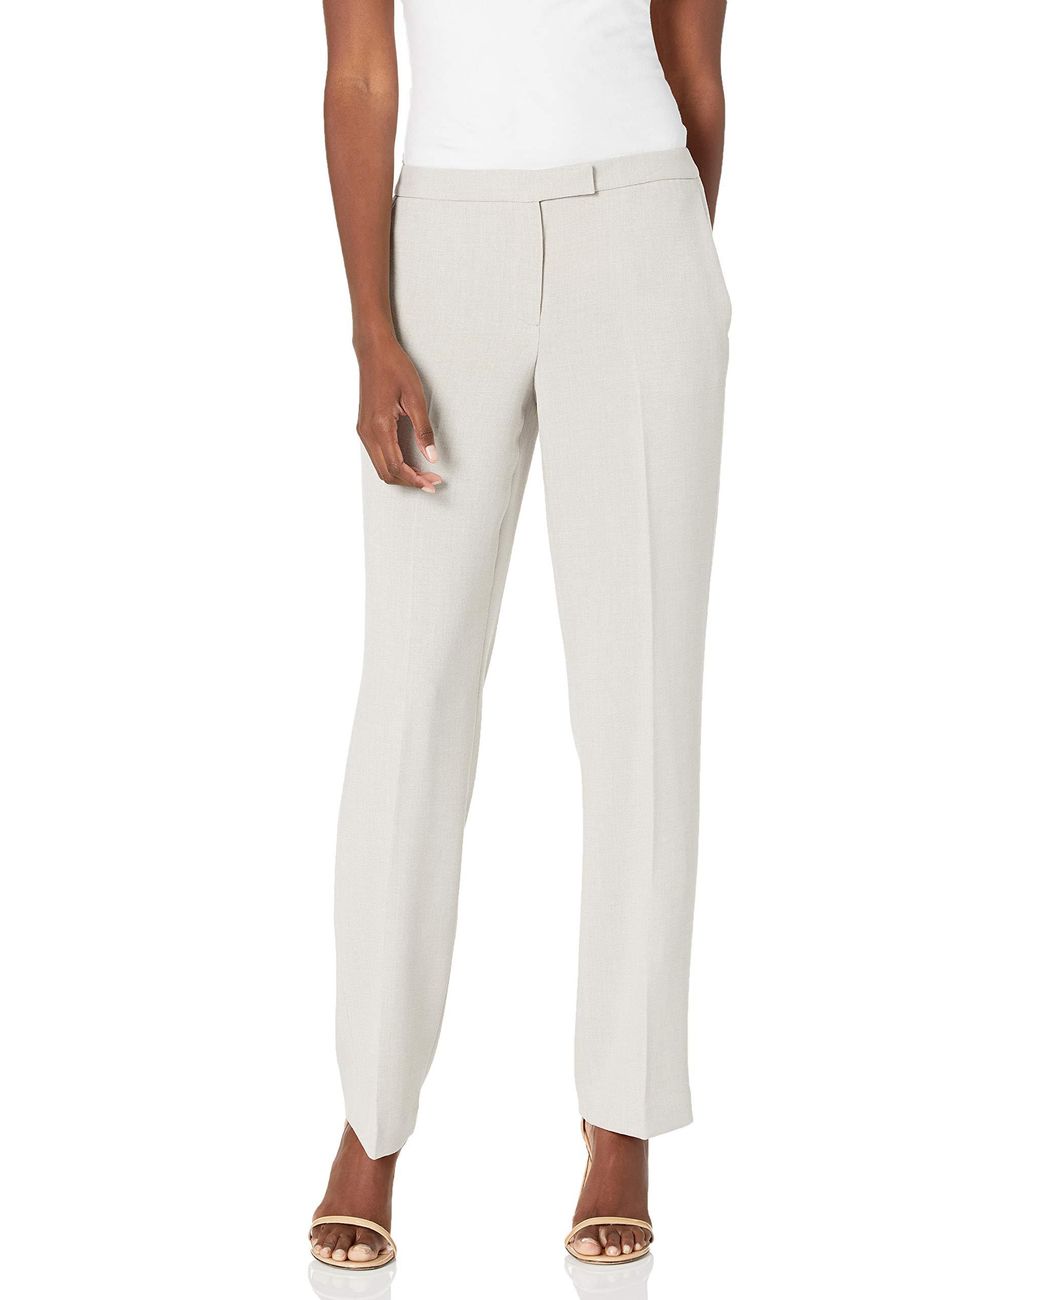 Kasper Plus Size Pebble Stretch Crepe Unlined Pant With Slit Pockets in ...